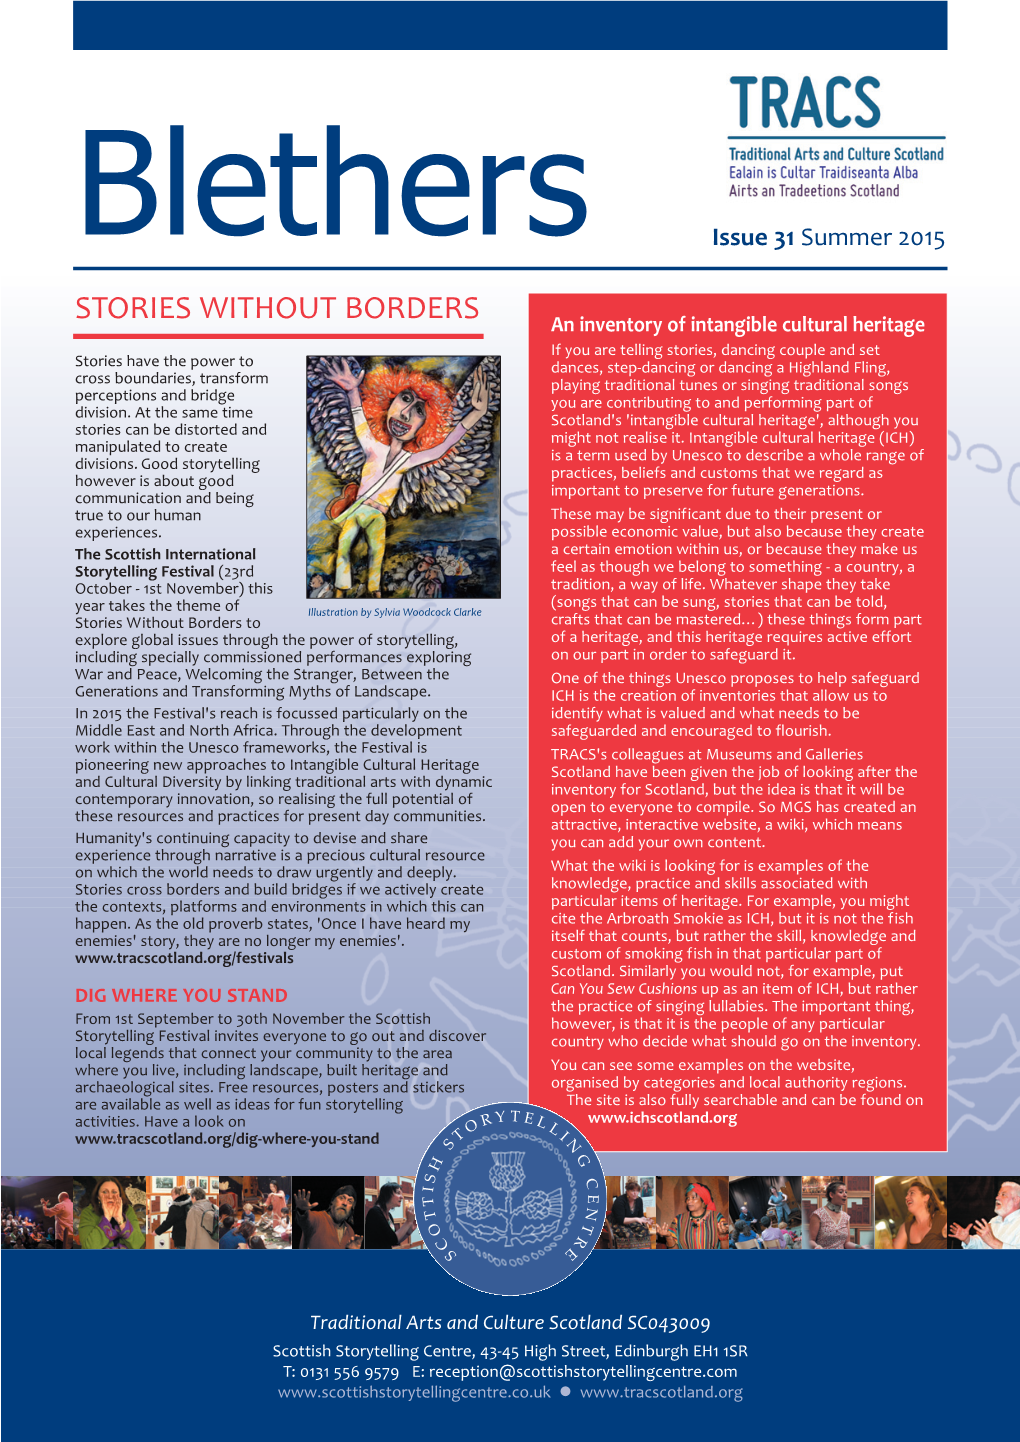 Blethers Issue 31.Qxd